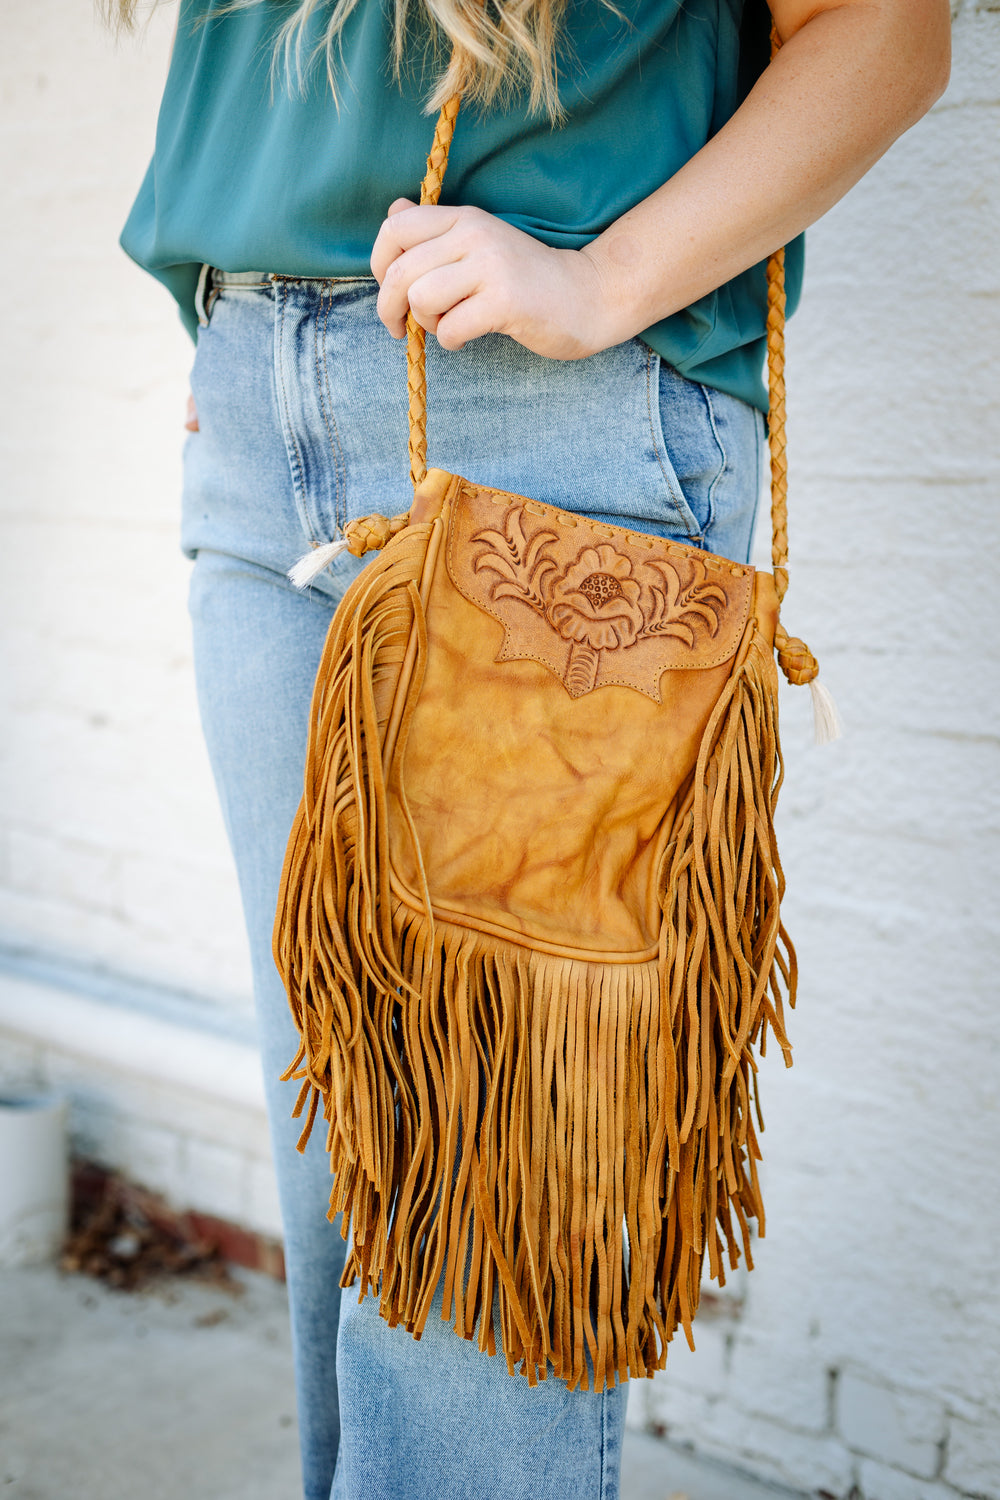 Tan Leather Crossbody Purse with Fringe